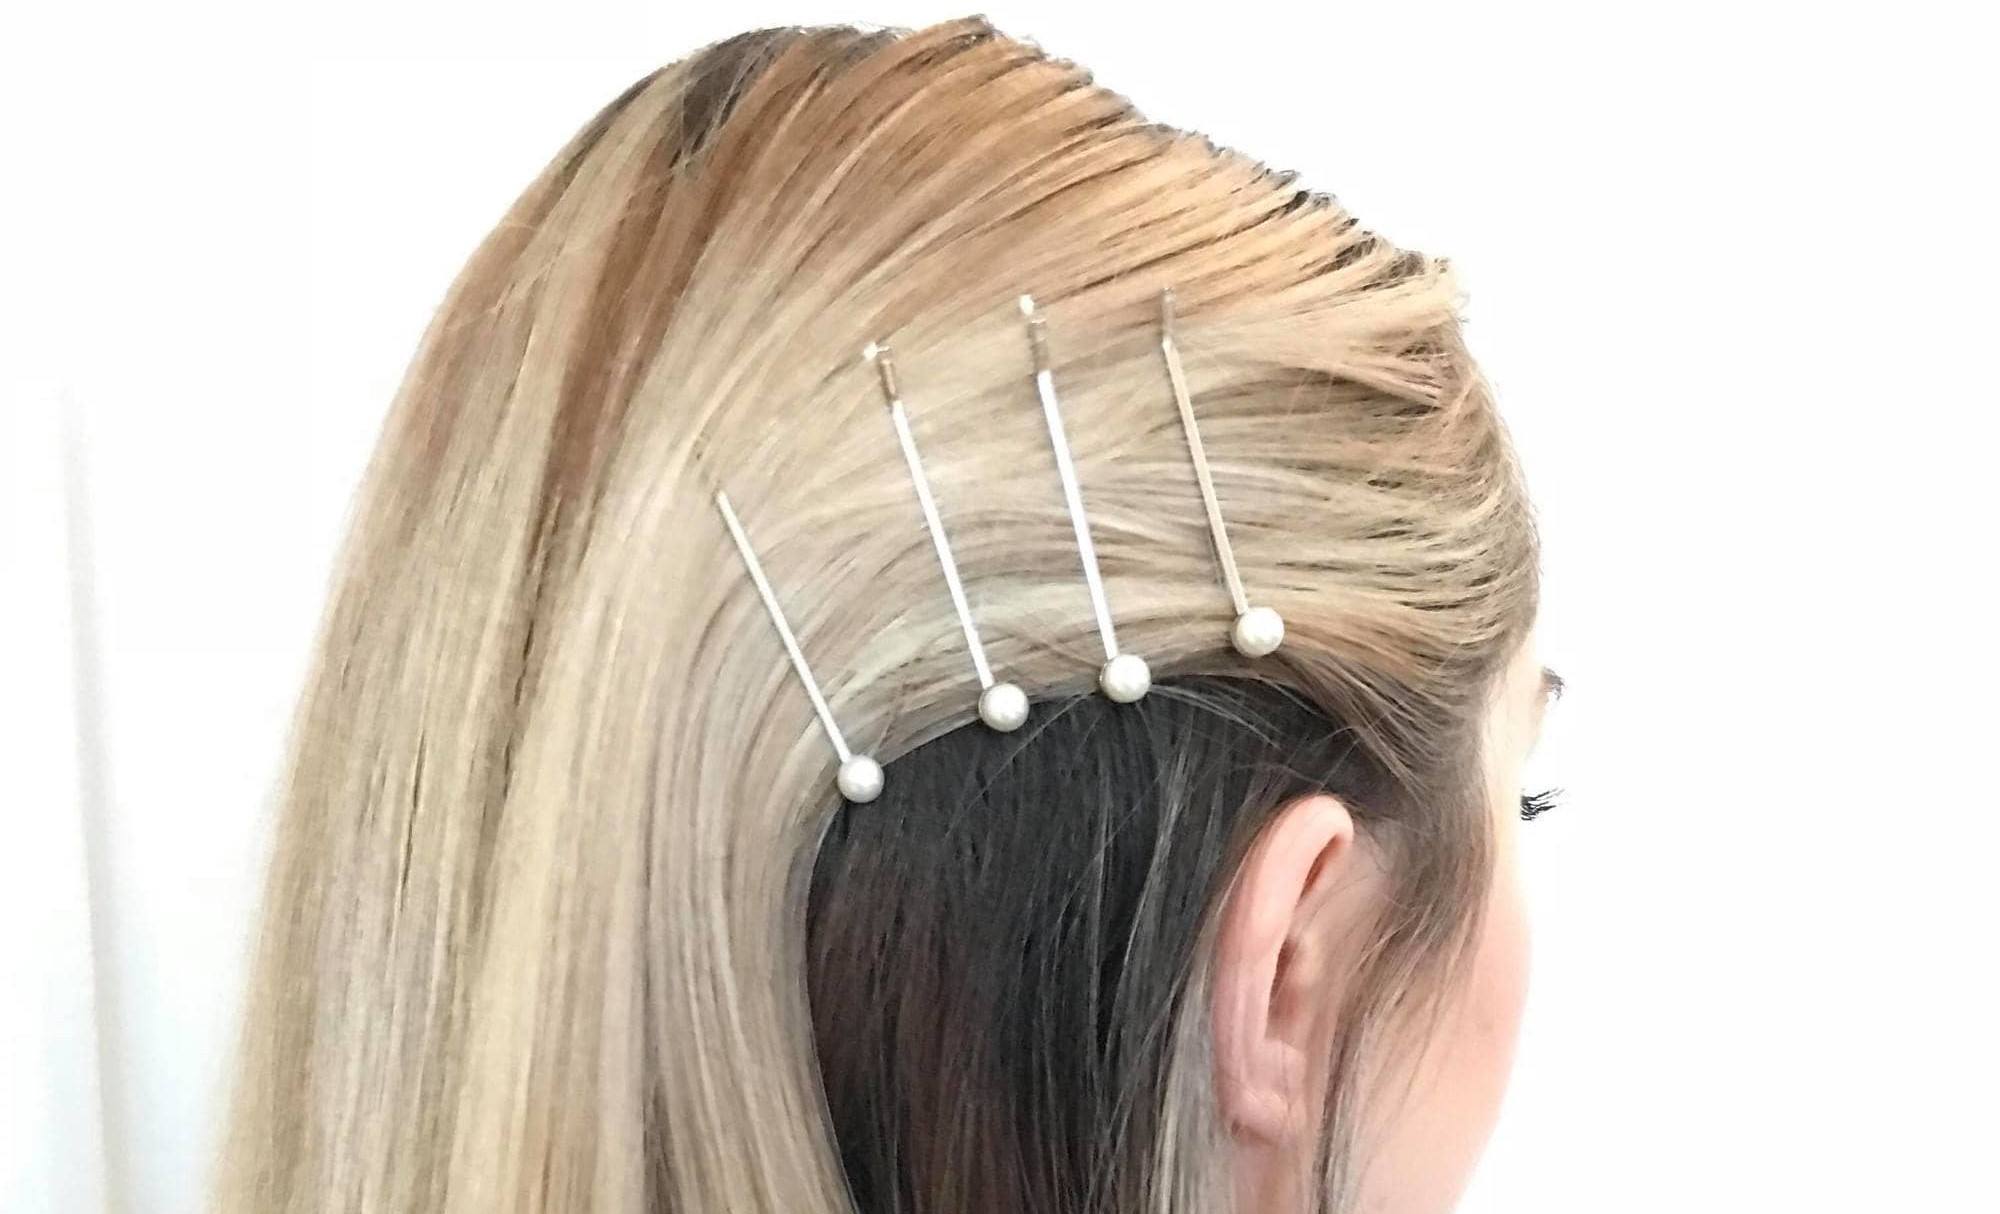 How To Master The Pearl Scattering Hair Accessory Trend